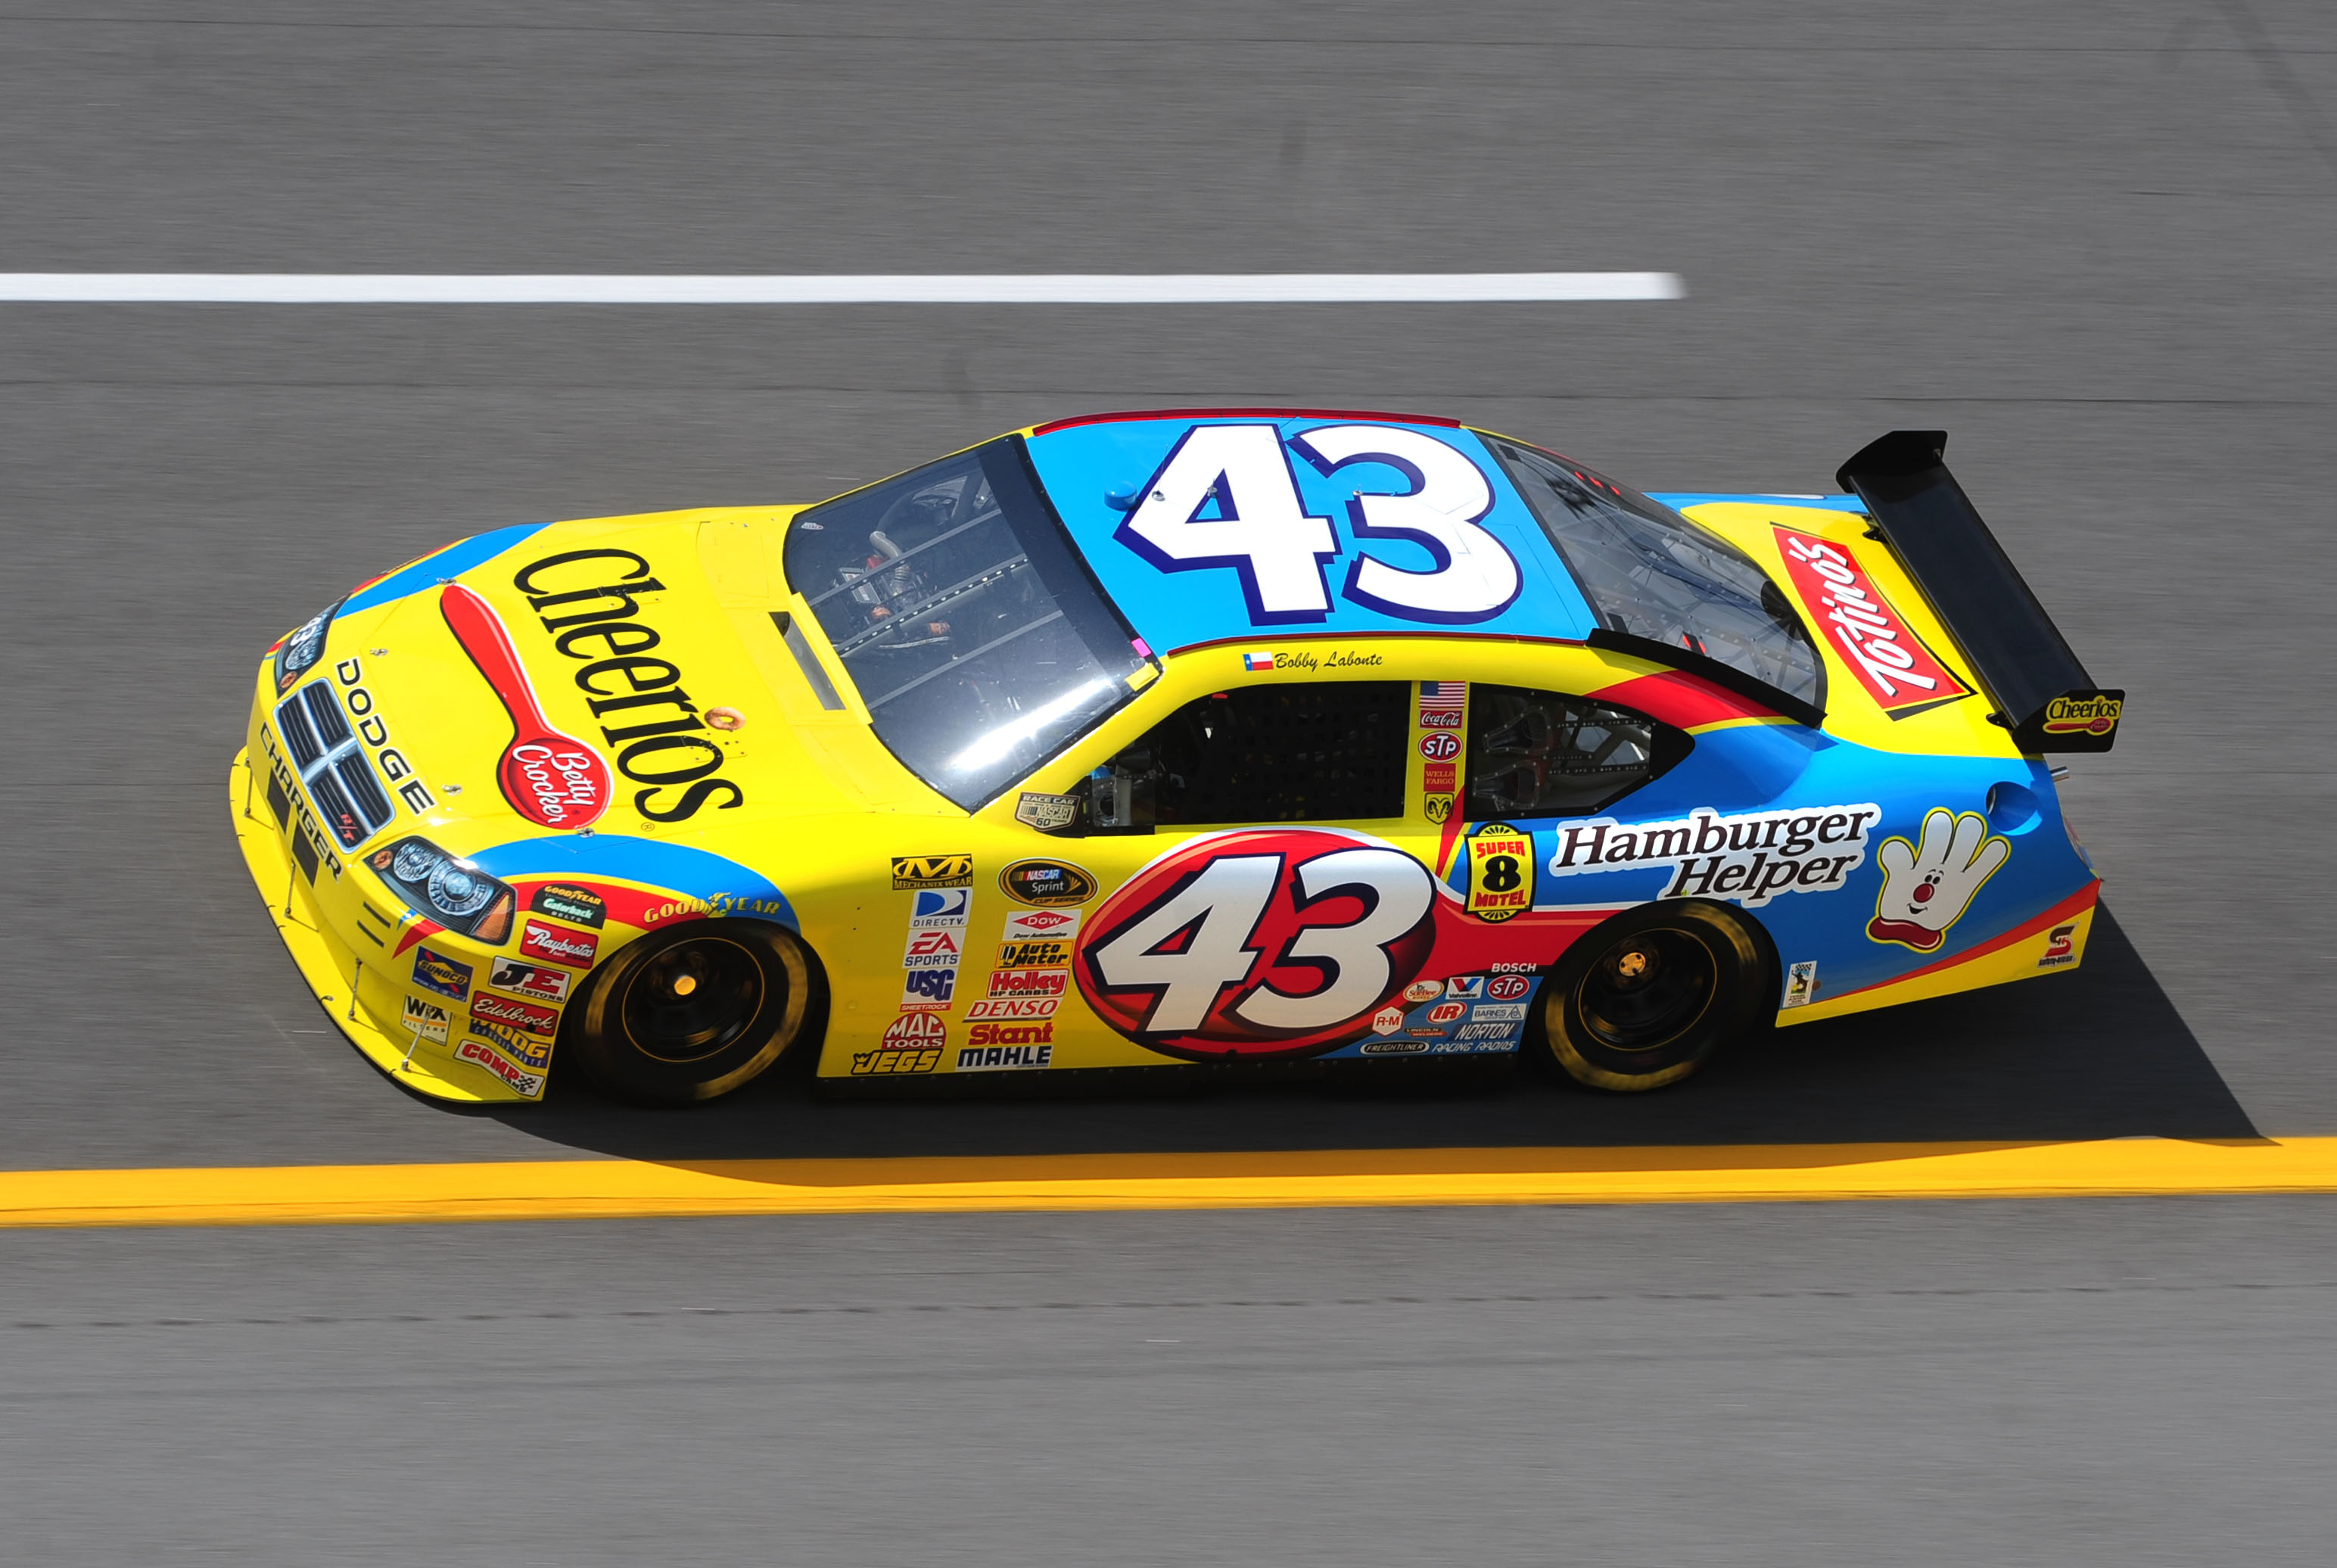 NASCAR Sprint Cup Series driver Bobby Labonte during practice for the Aarons 499 at Talladega Superspeedway.